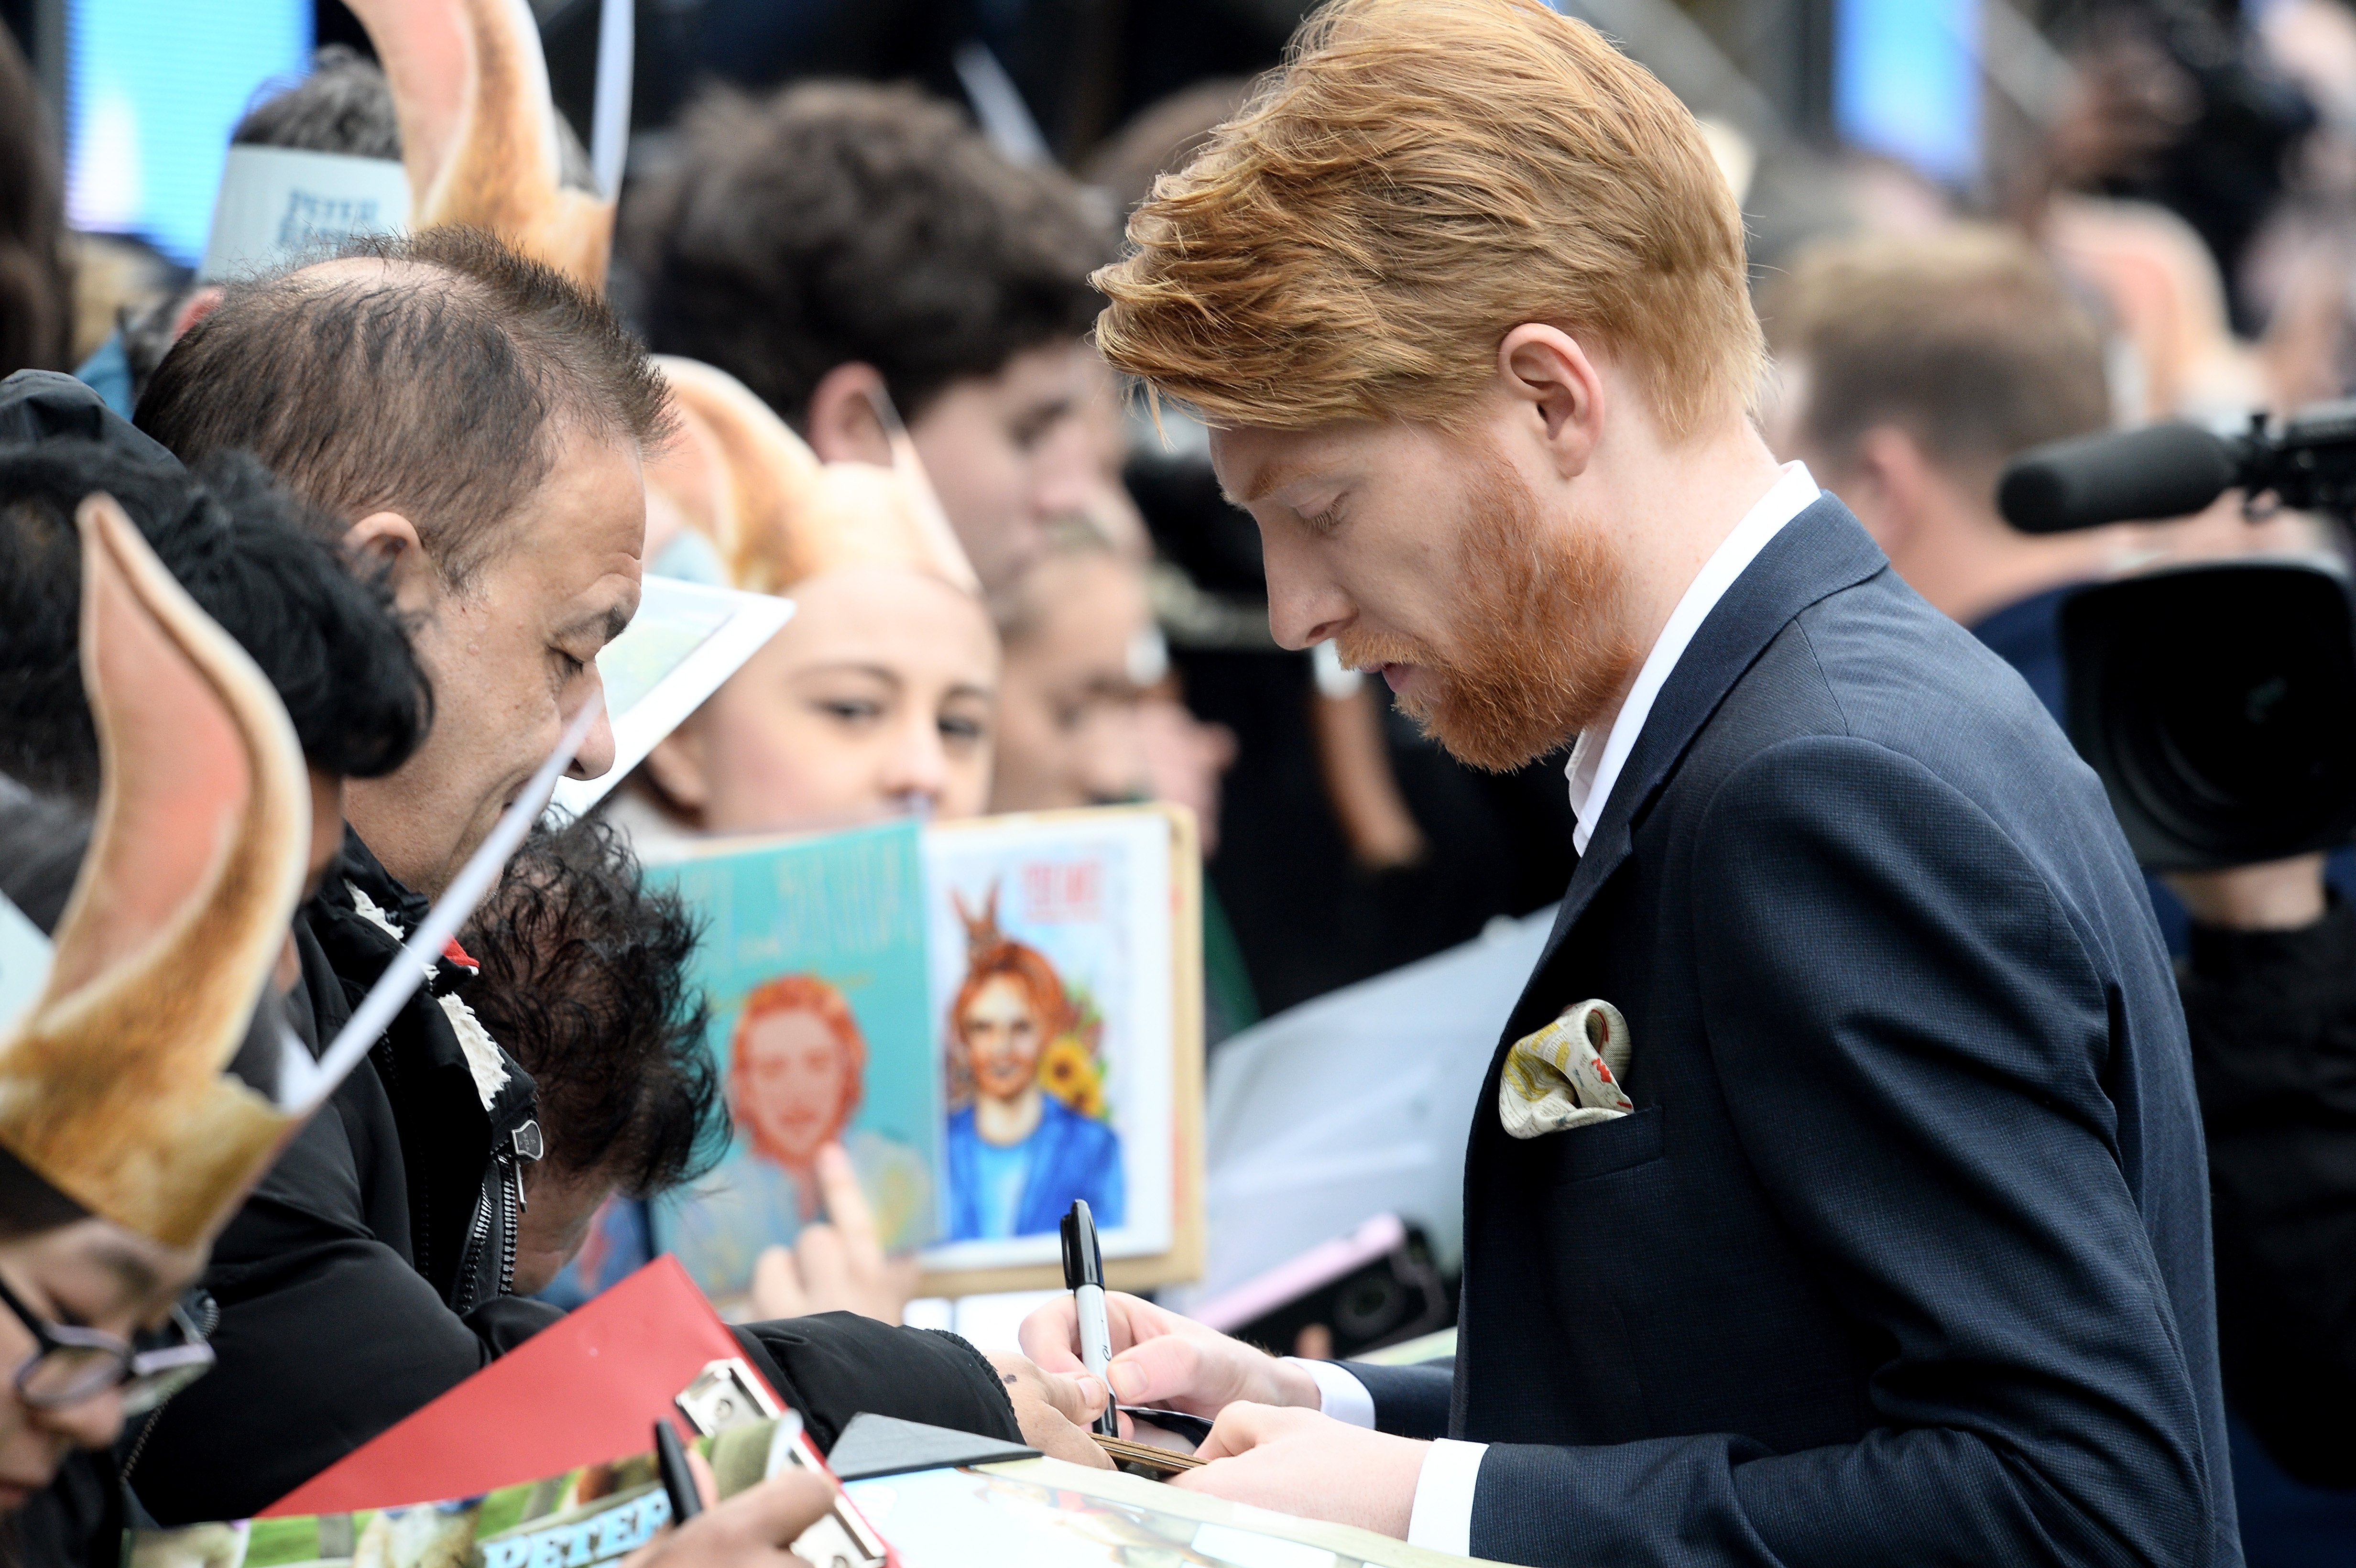 Domhnall Gleeson signing autographs for fans at the premiere of "Peter Rabbit" on March 11, 2018, in London | Source: Getty Images